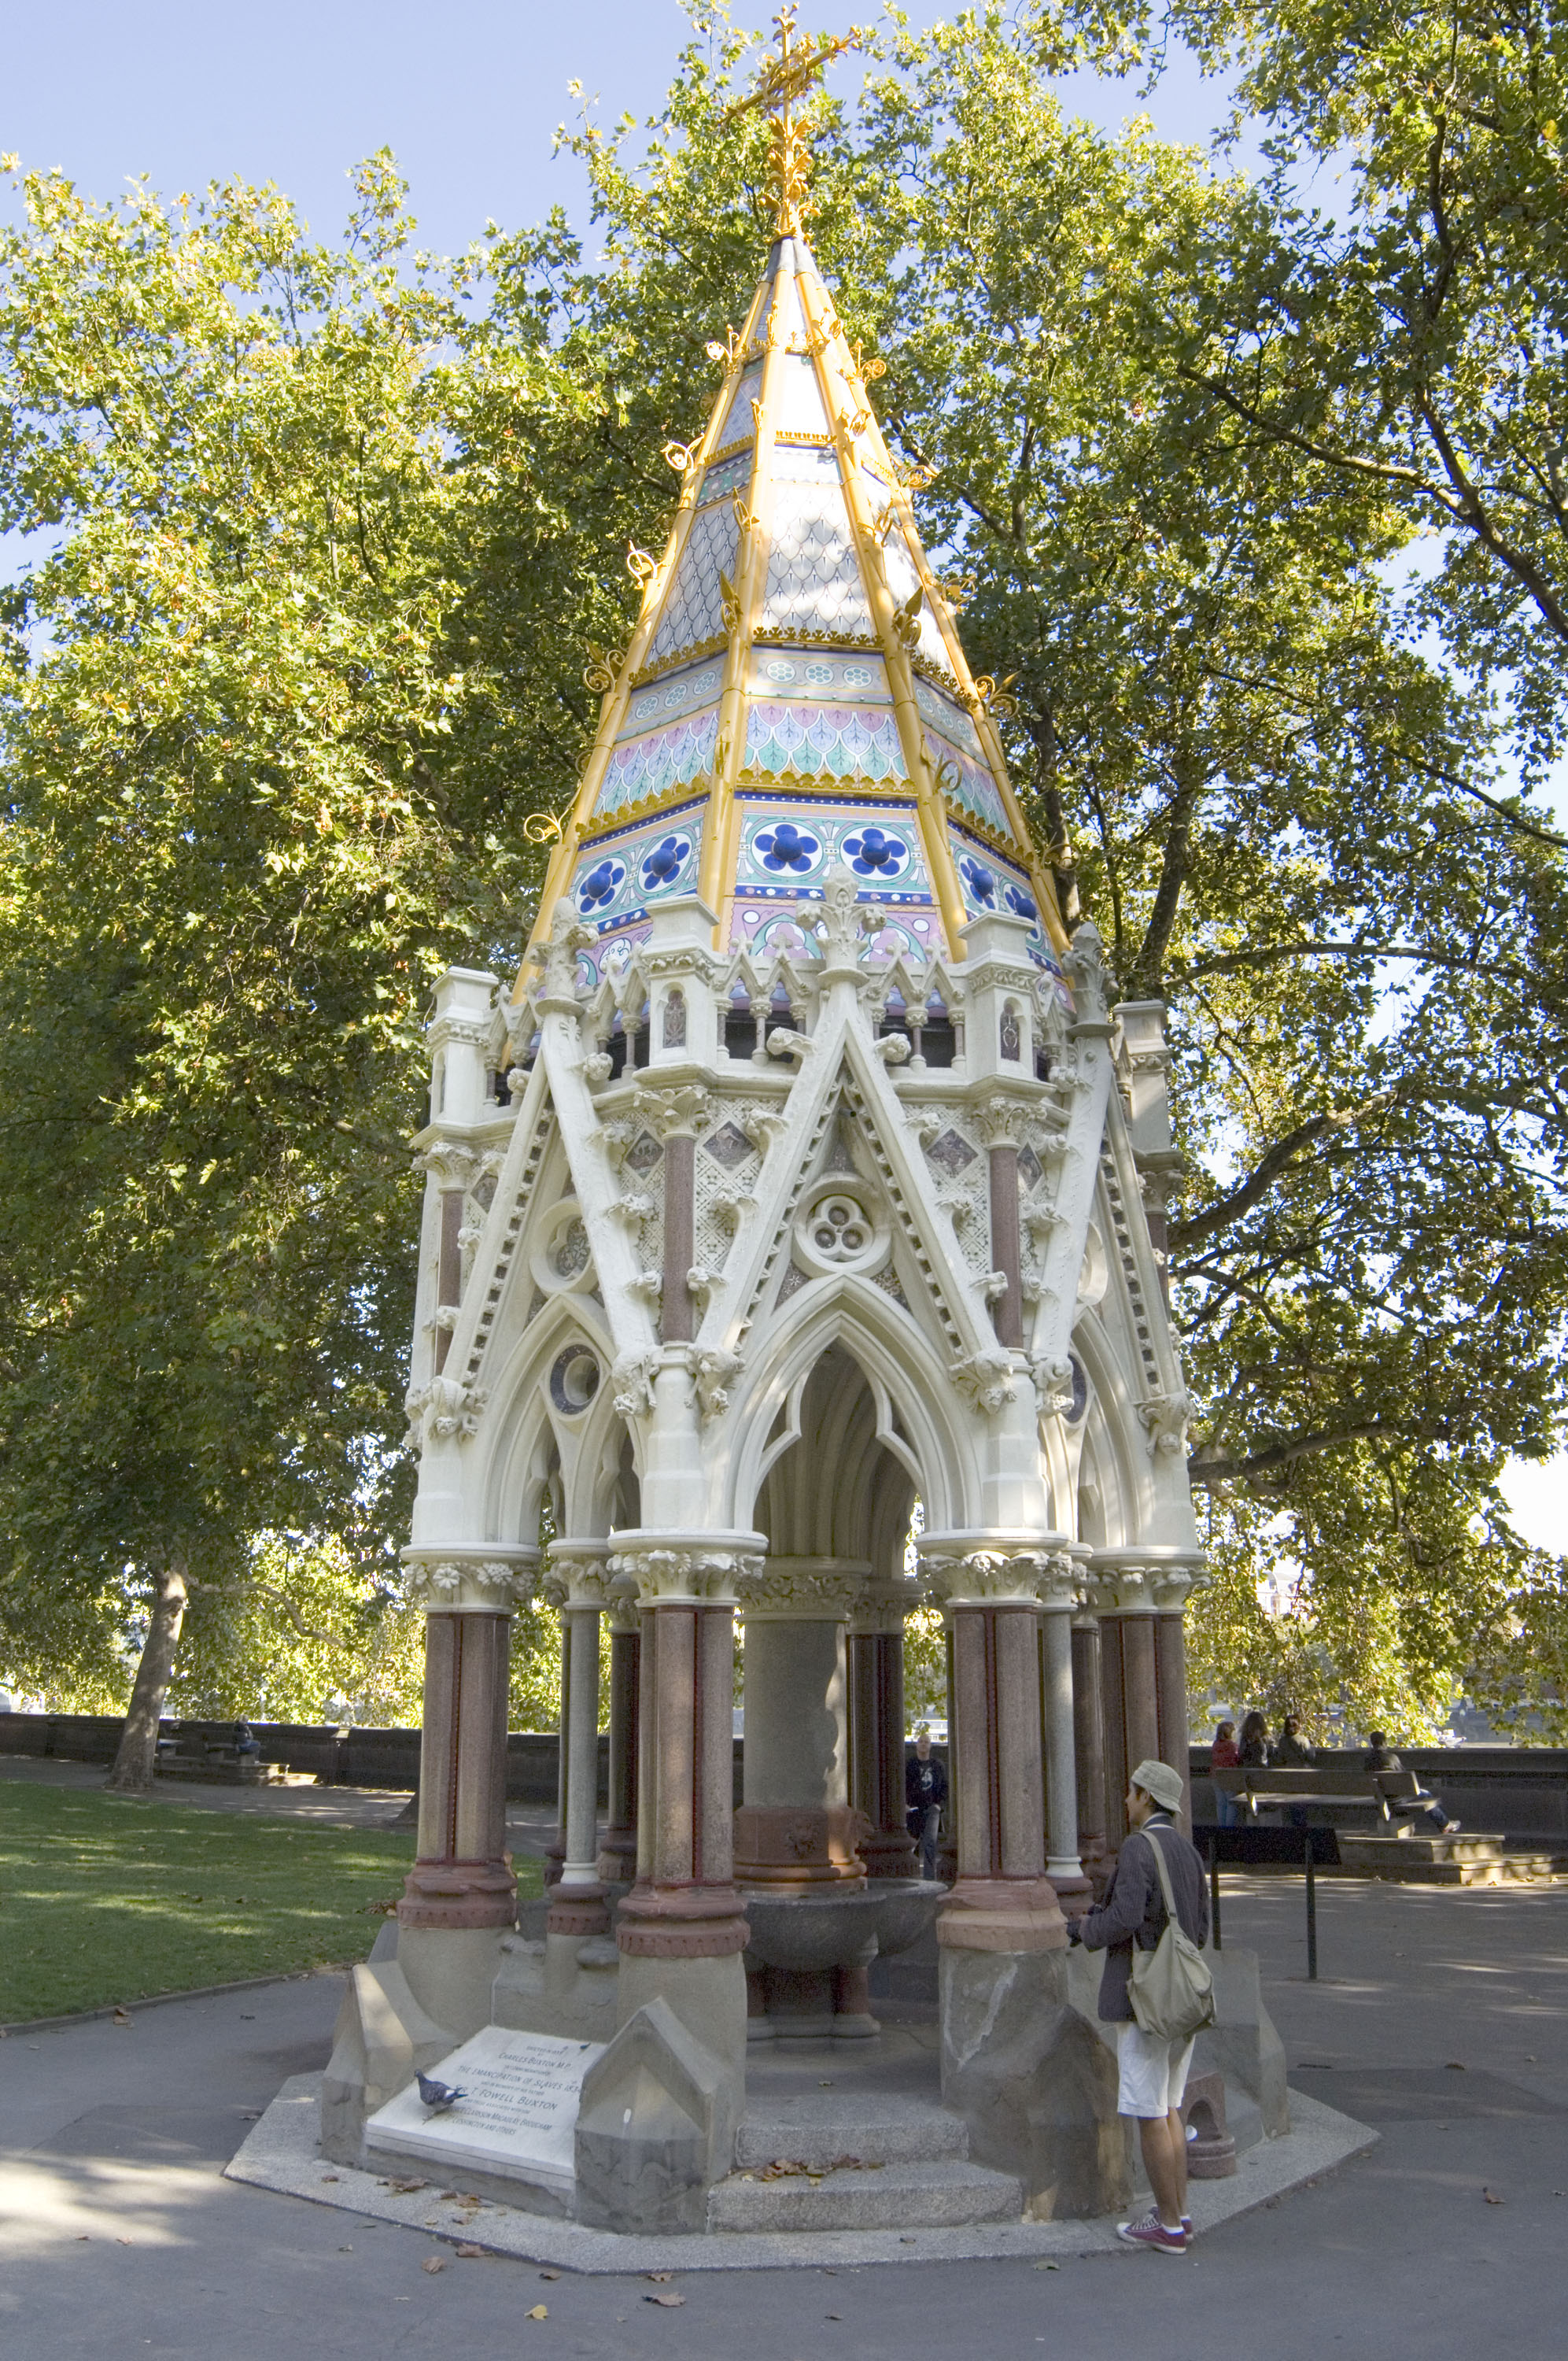 Elaborate Victorian Gothic pavilion, octagonal with a spire roof. Below, a stone arcade with pointed trefoil arches on red granite shafts. Above, the roof covered with bright enamelled decoration – pink, white, blue, green and yellow.